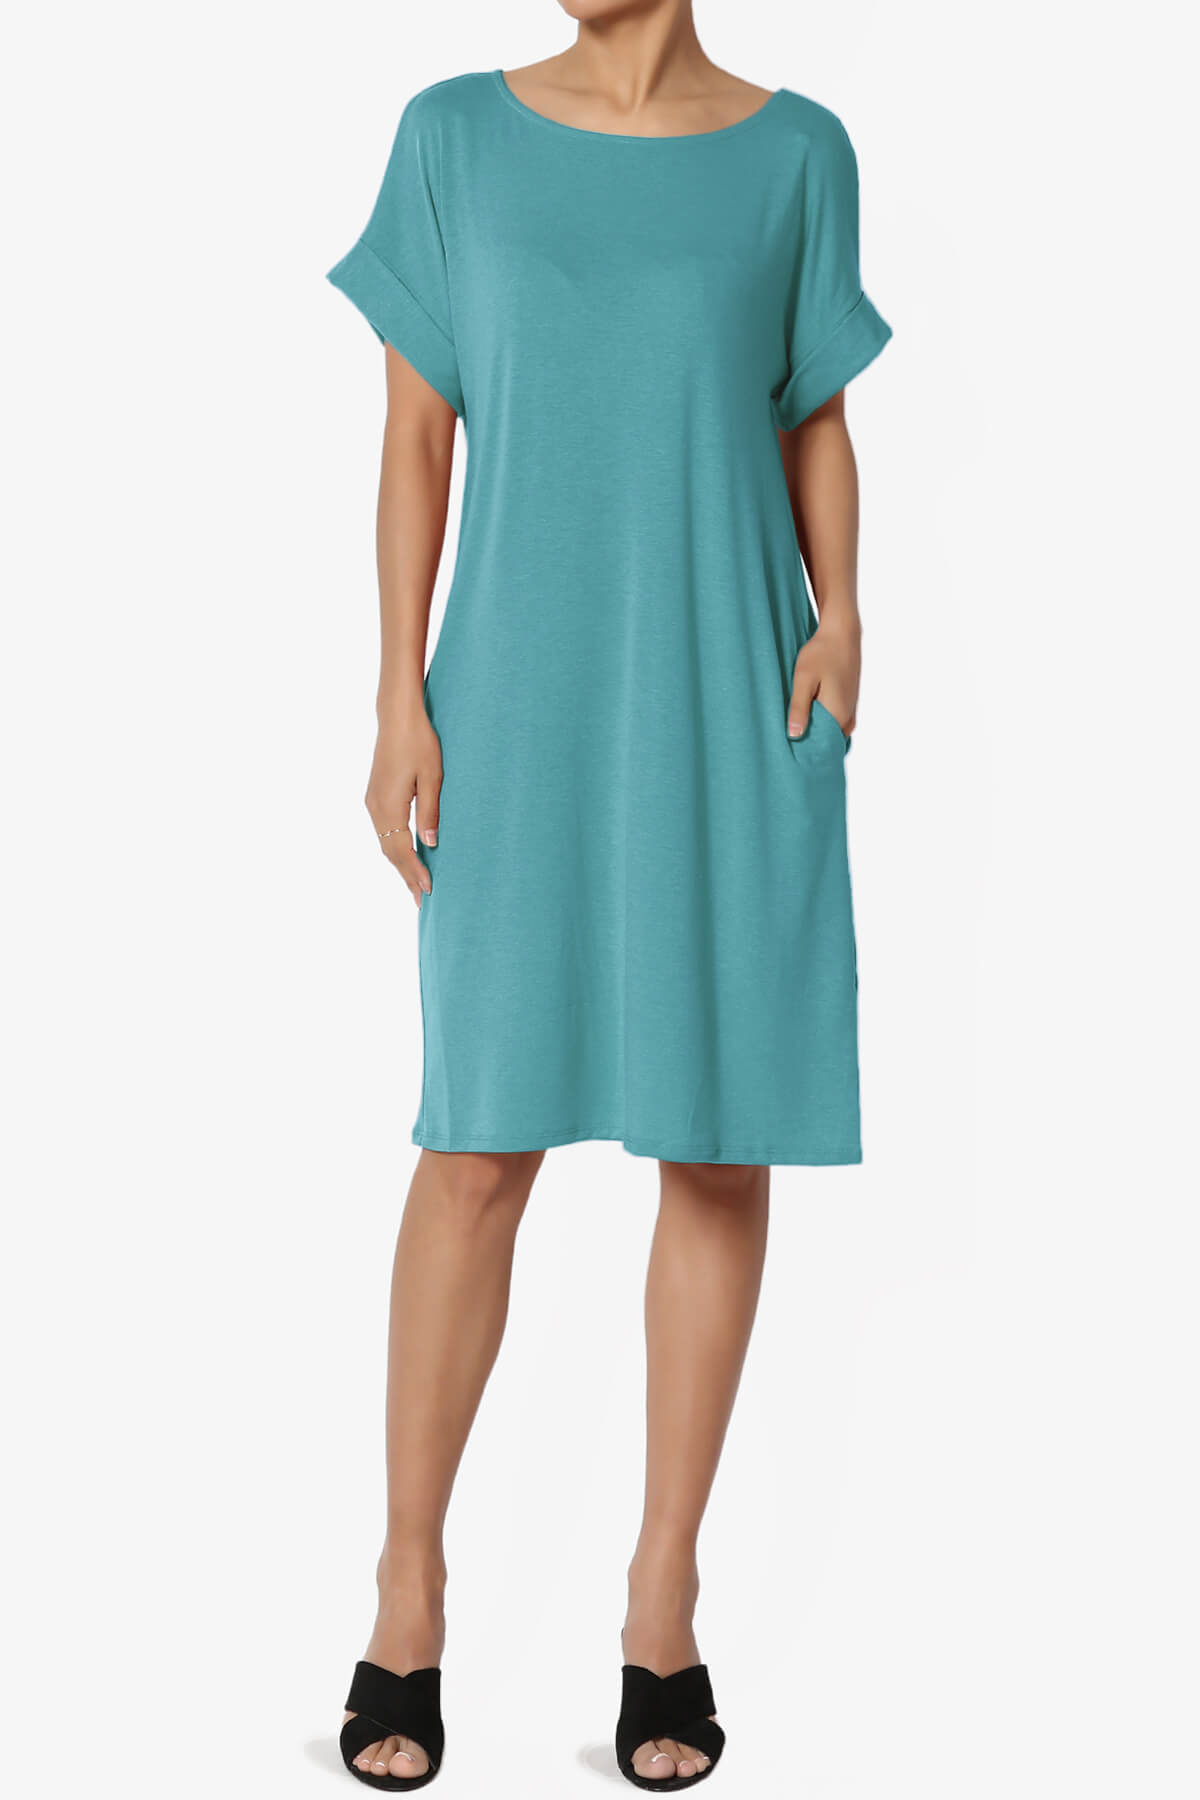 Janie Rolled Short Sleeve Round Neck Dress DUSTY TEAL_1